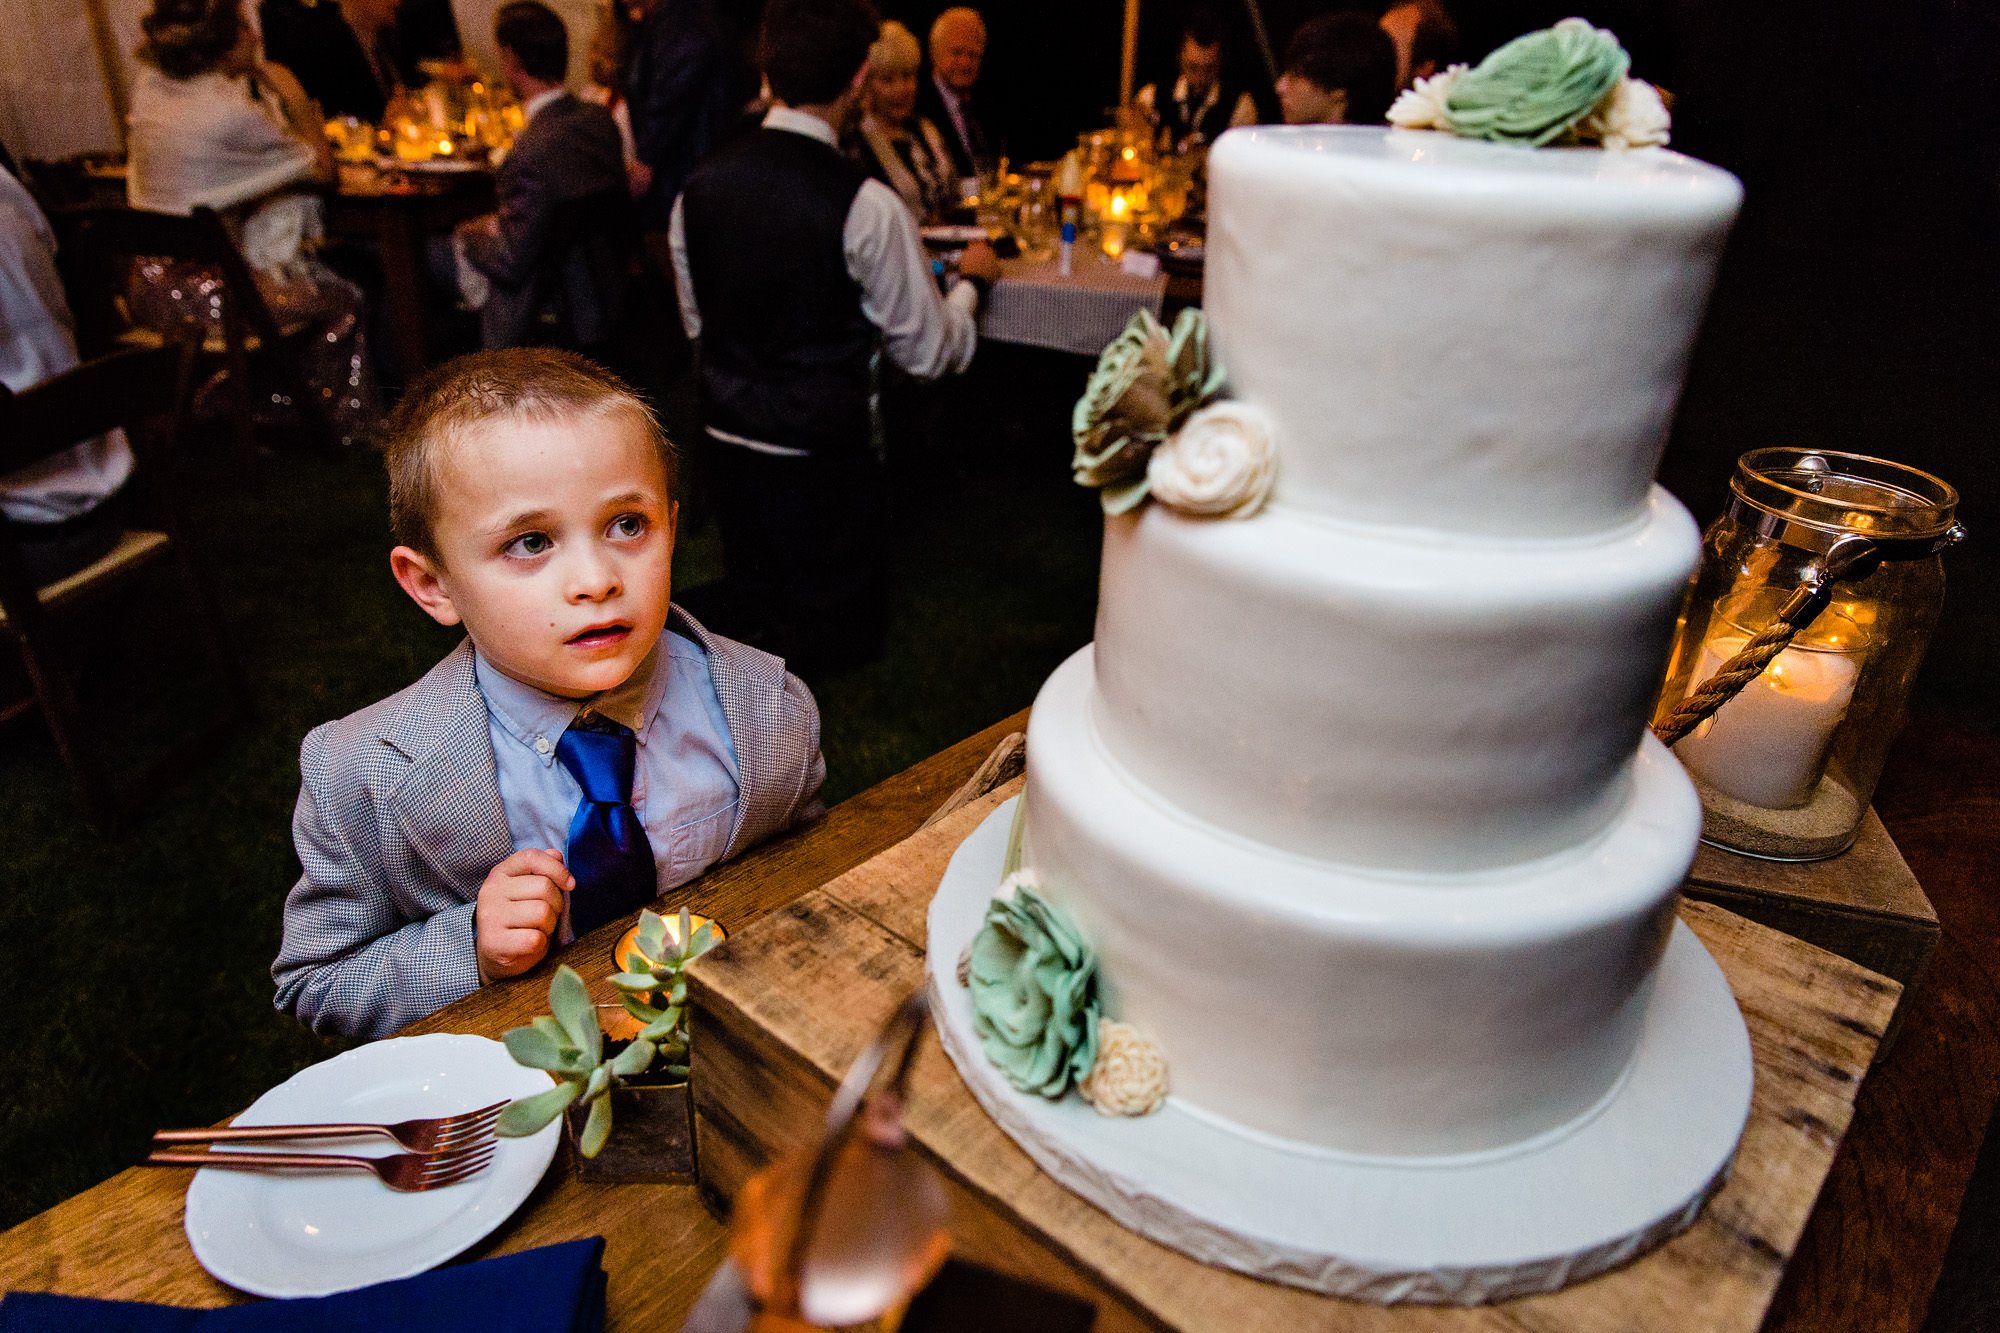 The ring bearer stares at the wedding cake in Maine